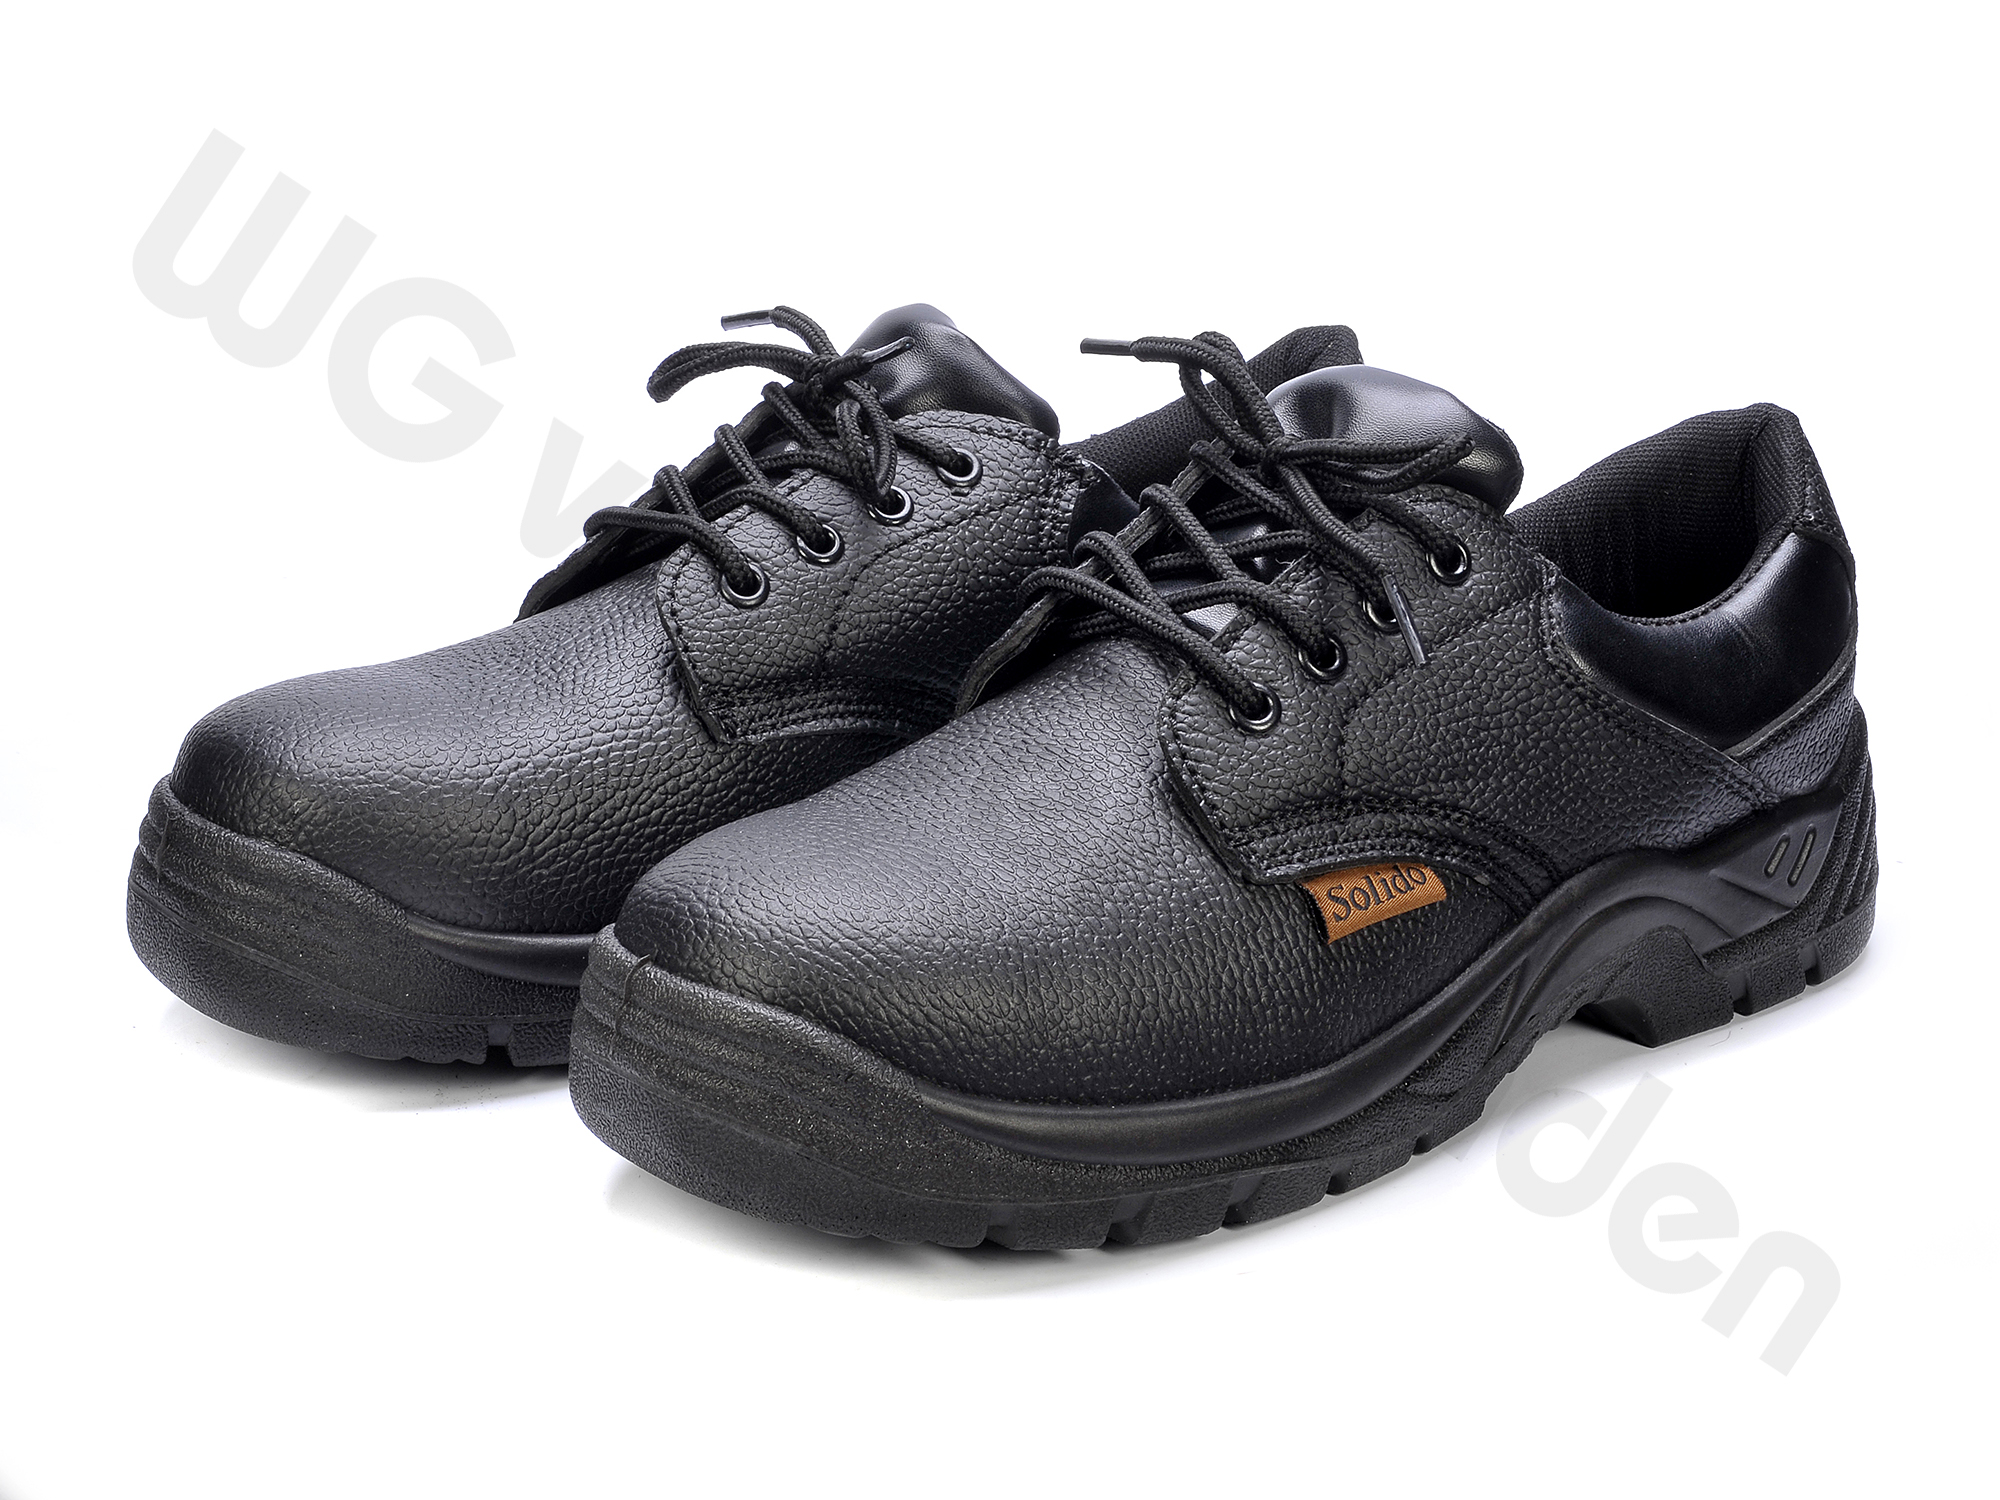 880607 SHOES SAFETY S1 WITH STEEL TOE SIZE 44 / 28CM CE